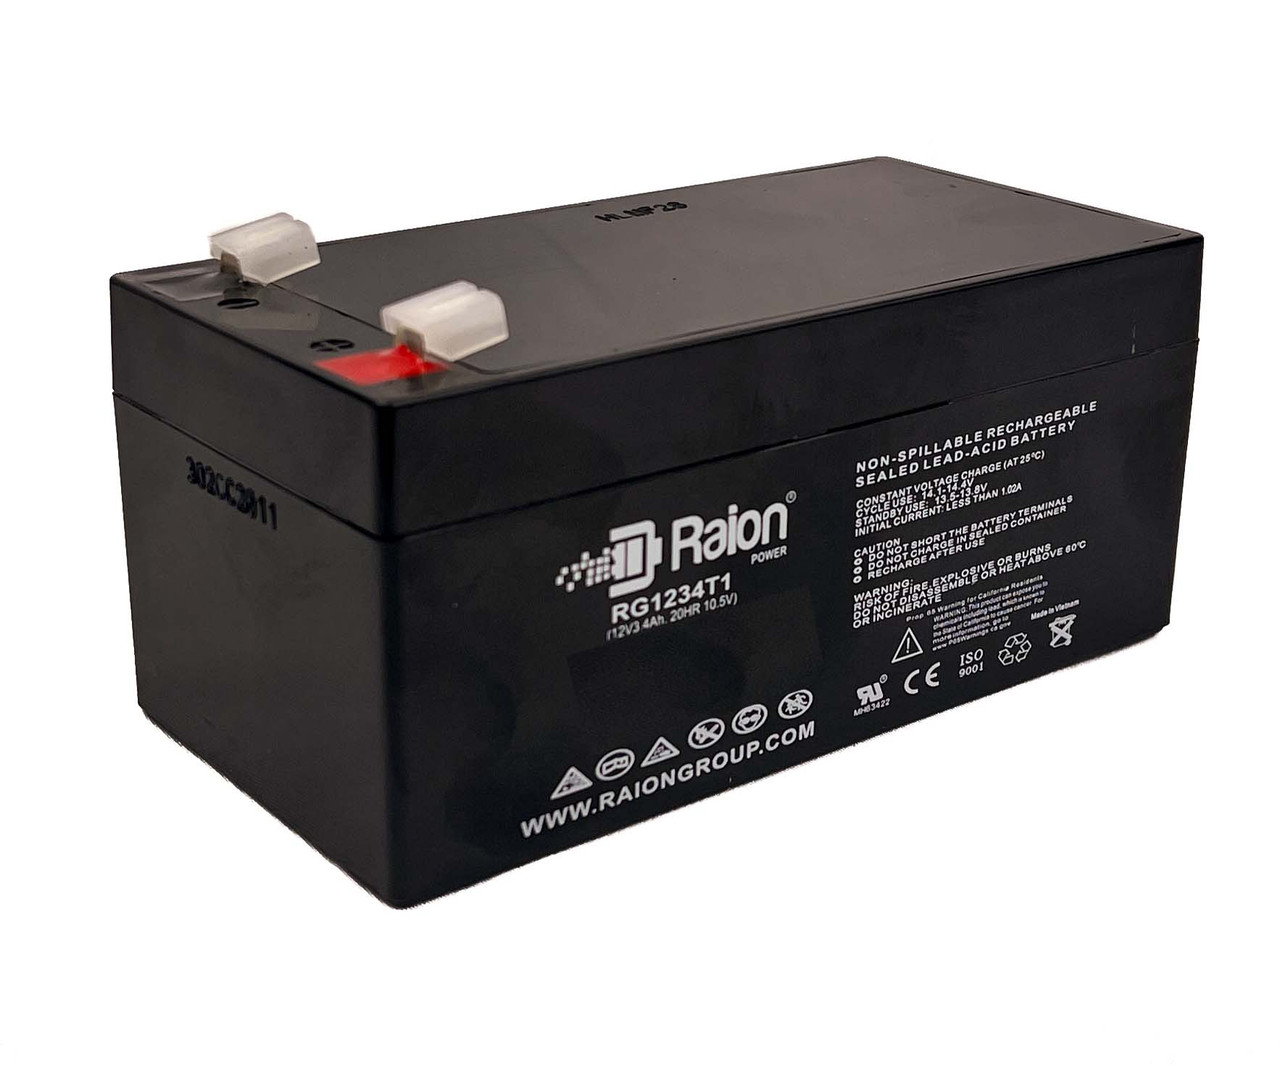 Raion Power 12V 3.4Ah Non-Spillable Replacement Battery for Zeus PC3.4-12F1